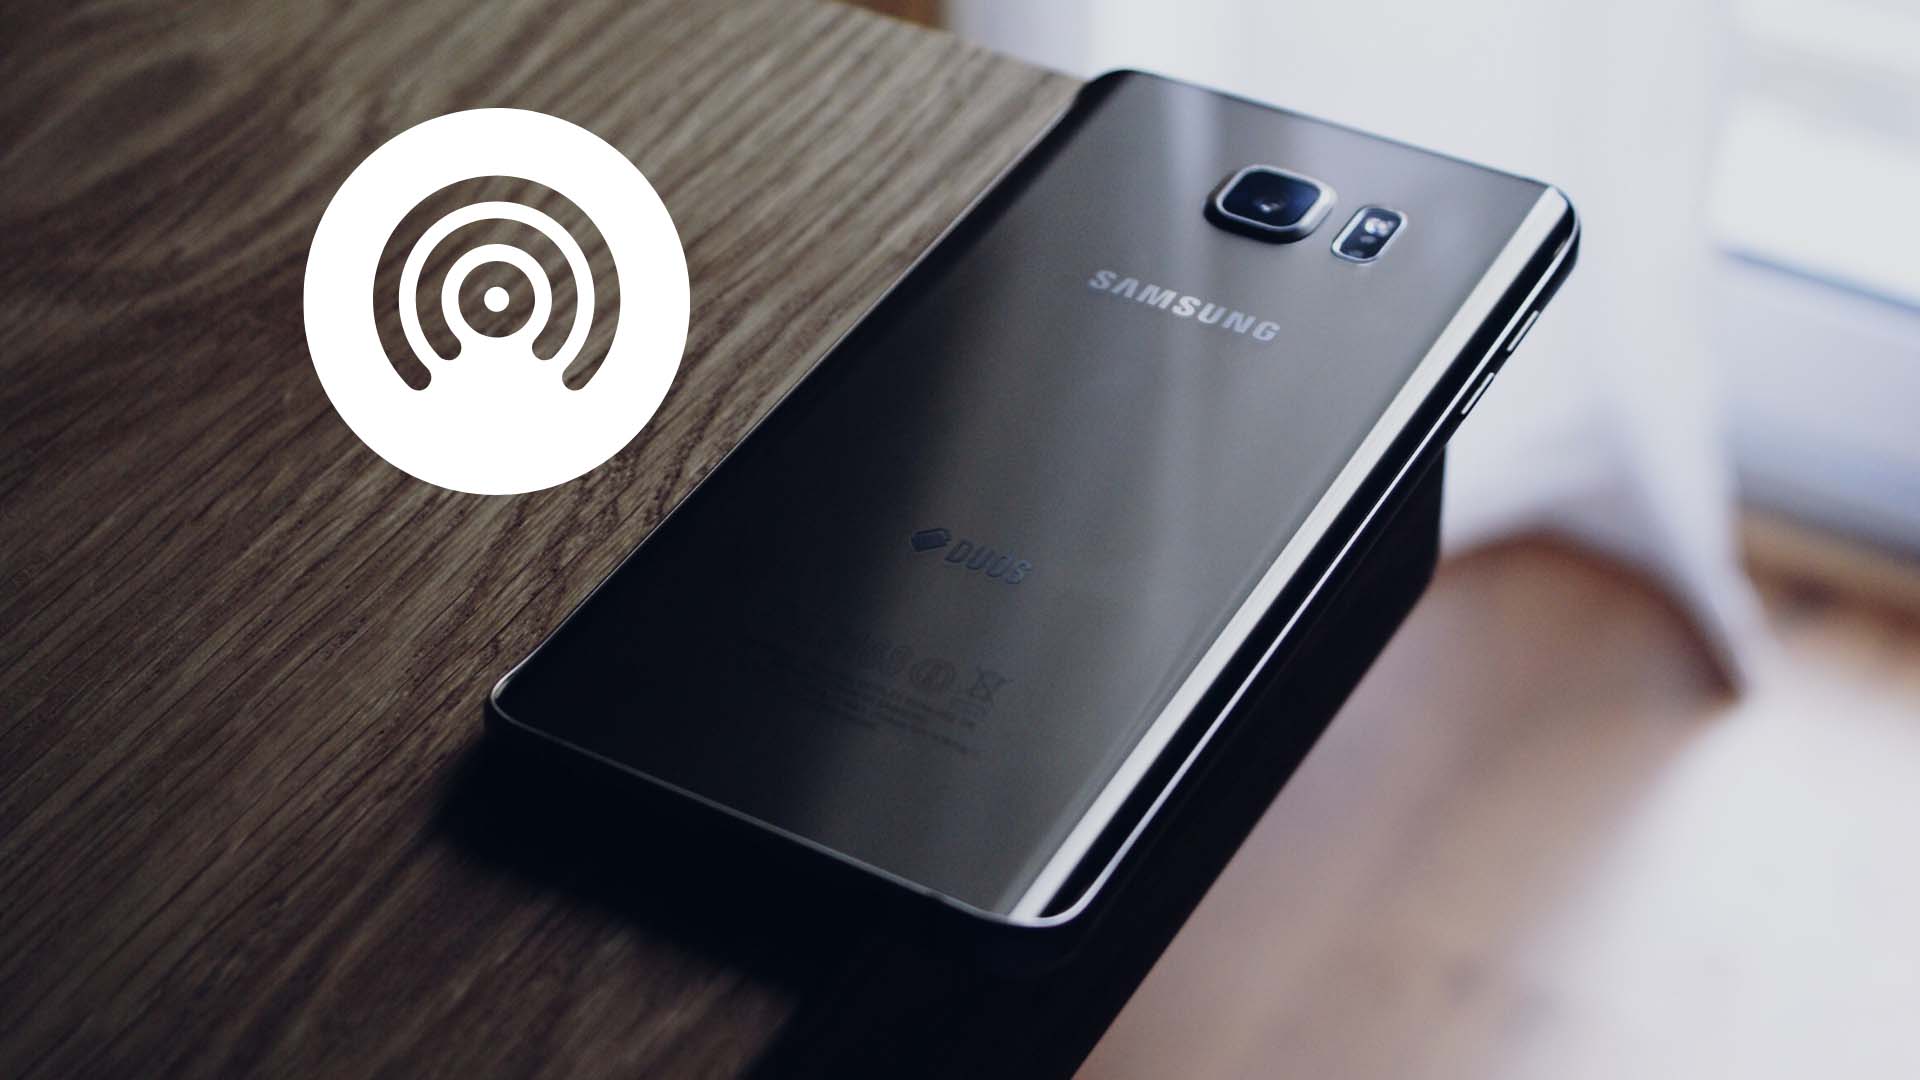 Samsung's Sam Explained: Is Sam A Bixby Replacement For Galaxy Phones?